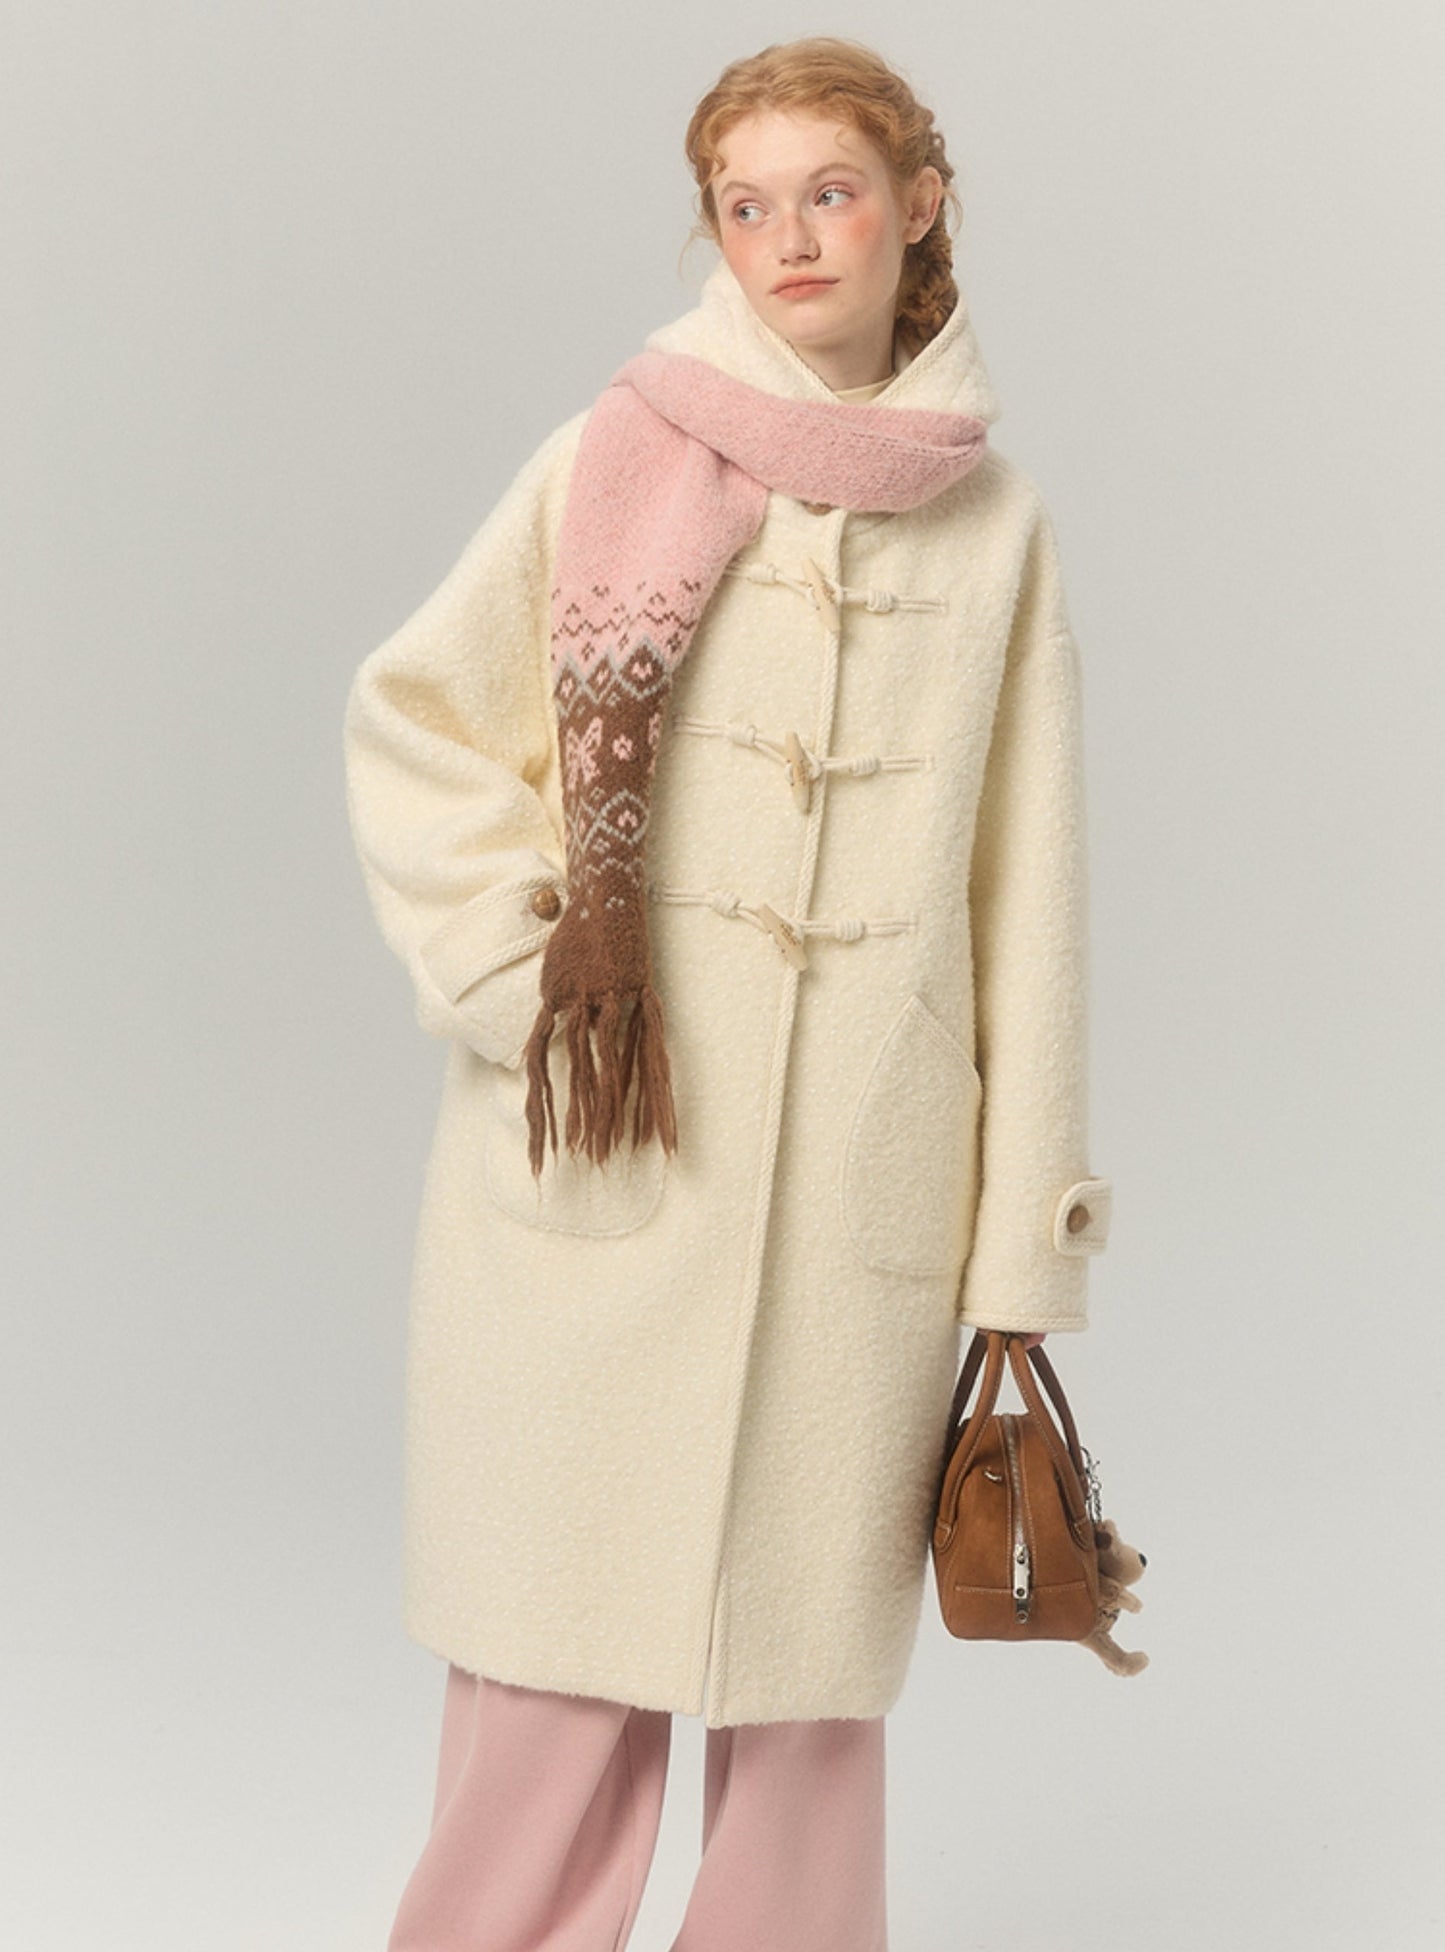 Long thicked hooded horn-buttoned tweed coat